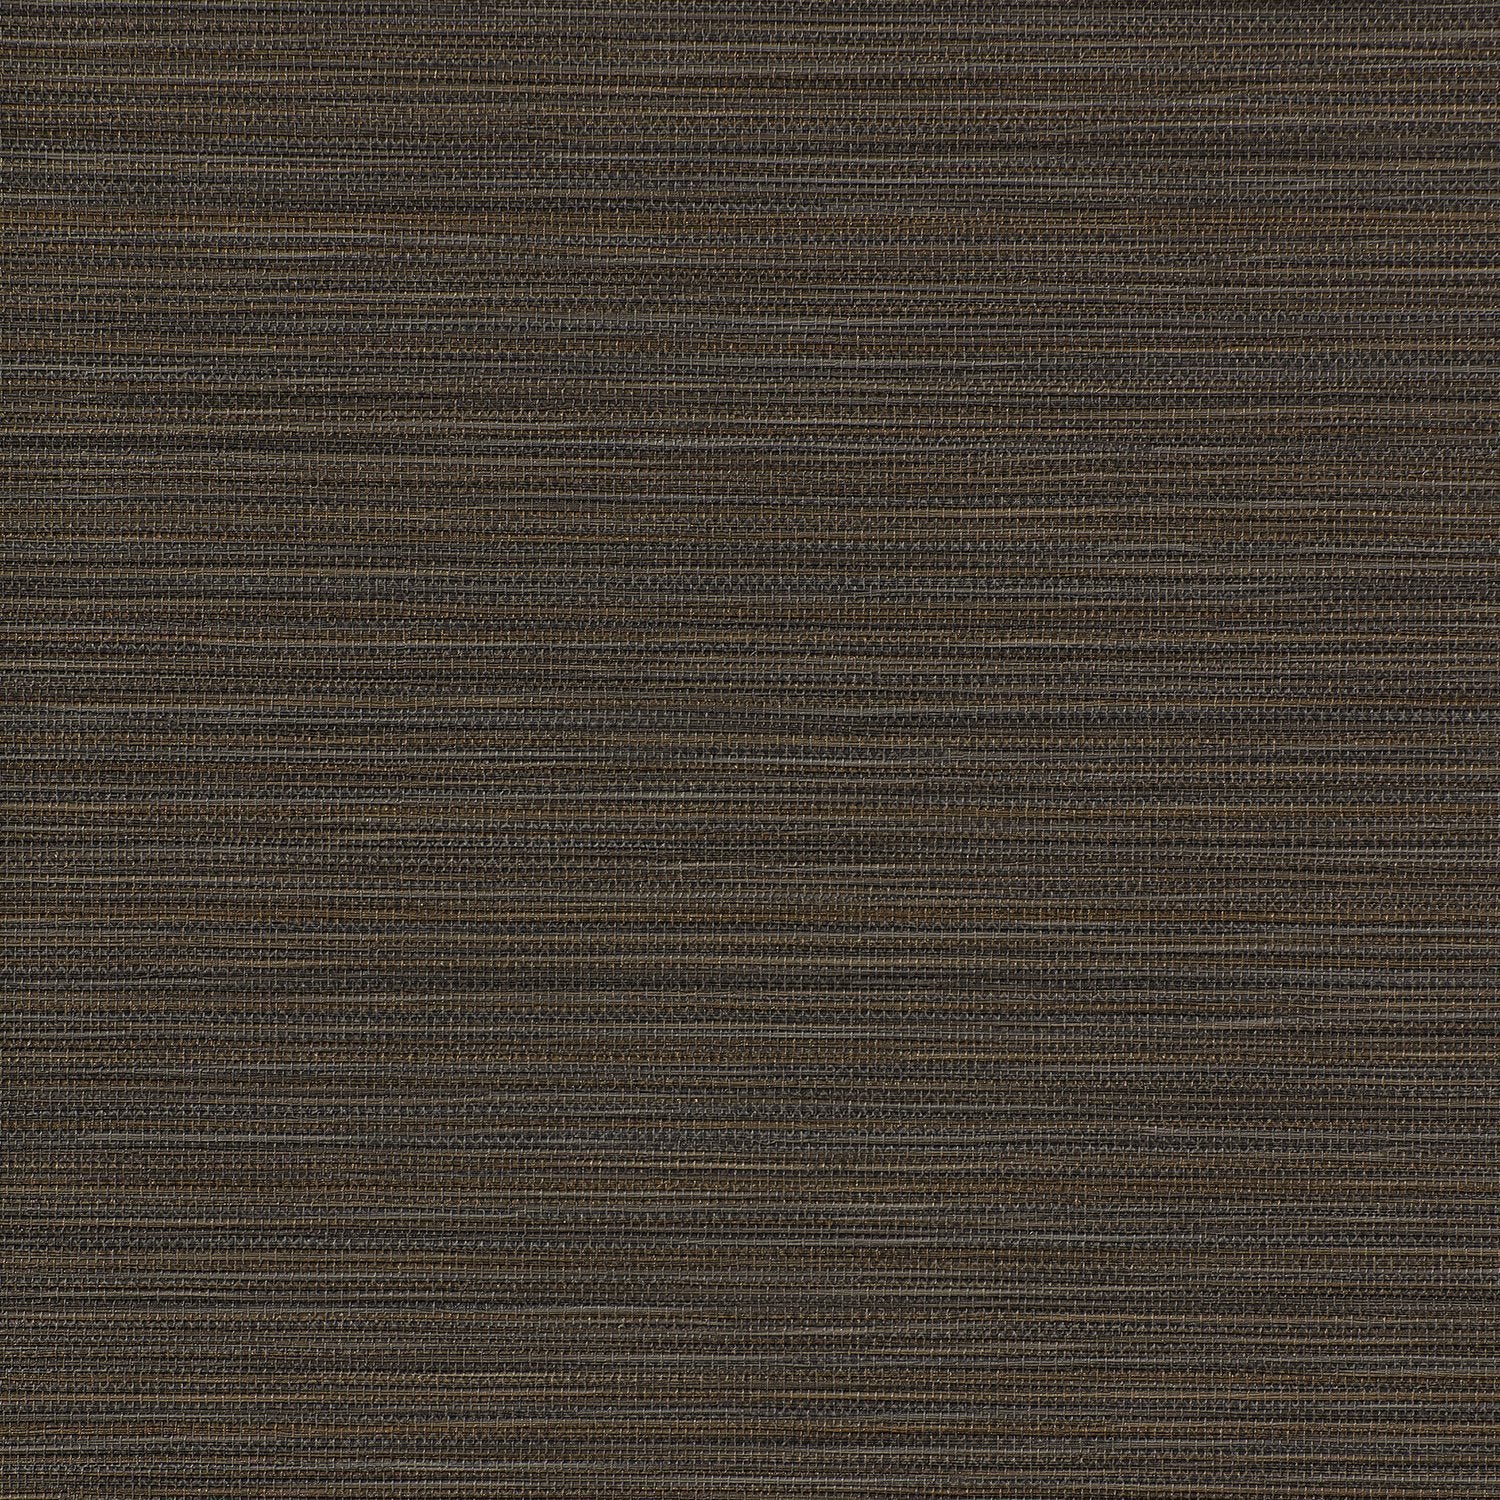 In Stitches - Y47806 - Wallcovering - Vycon - Kube Contract